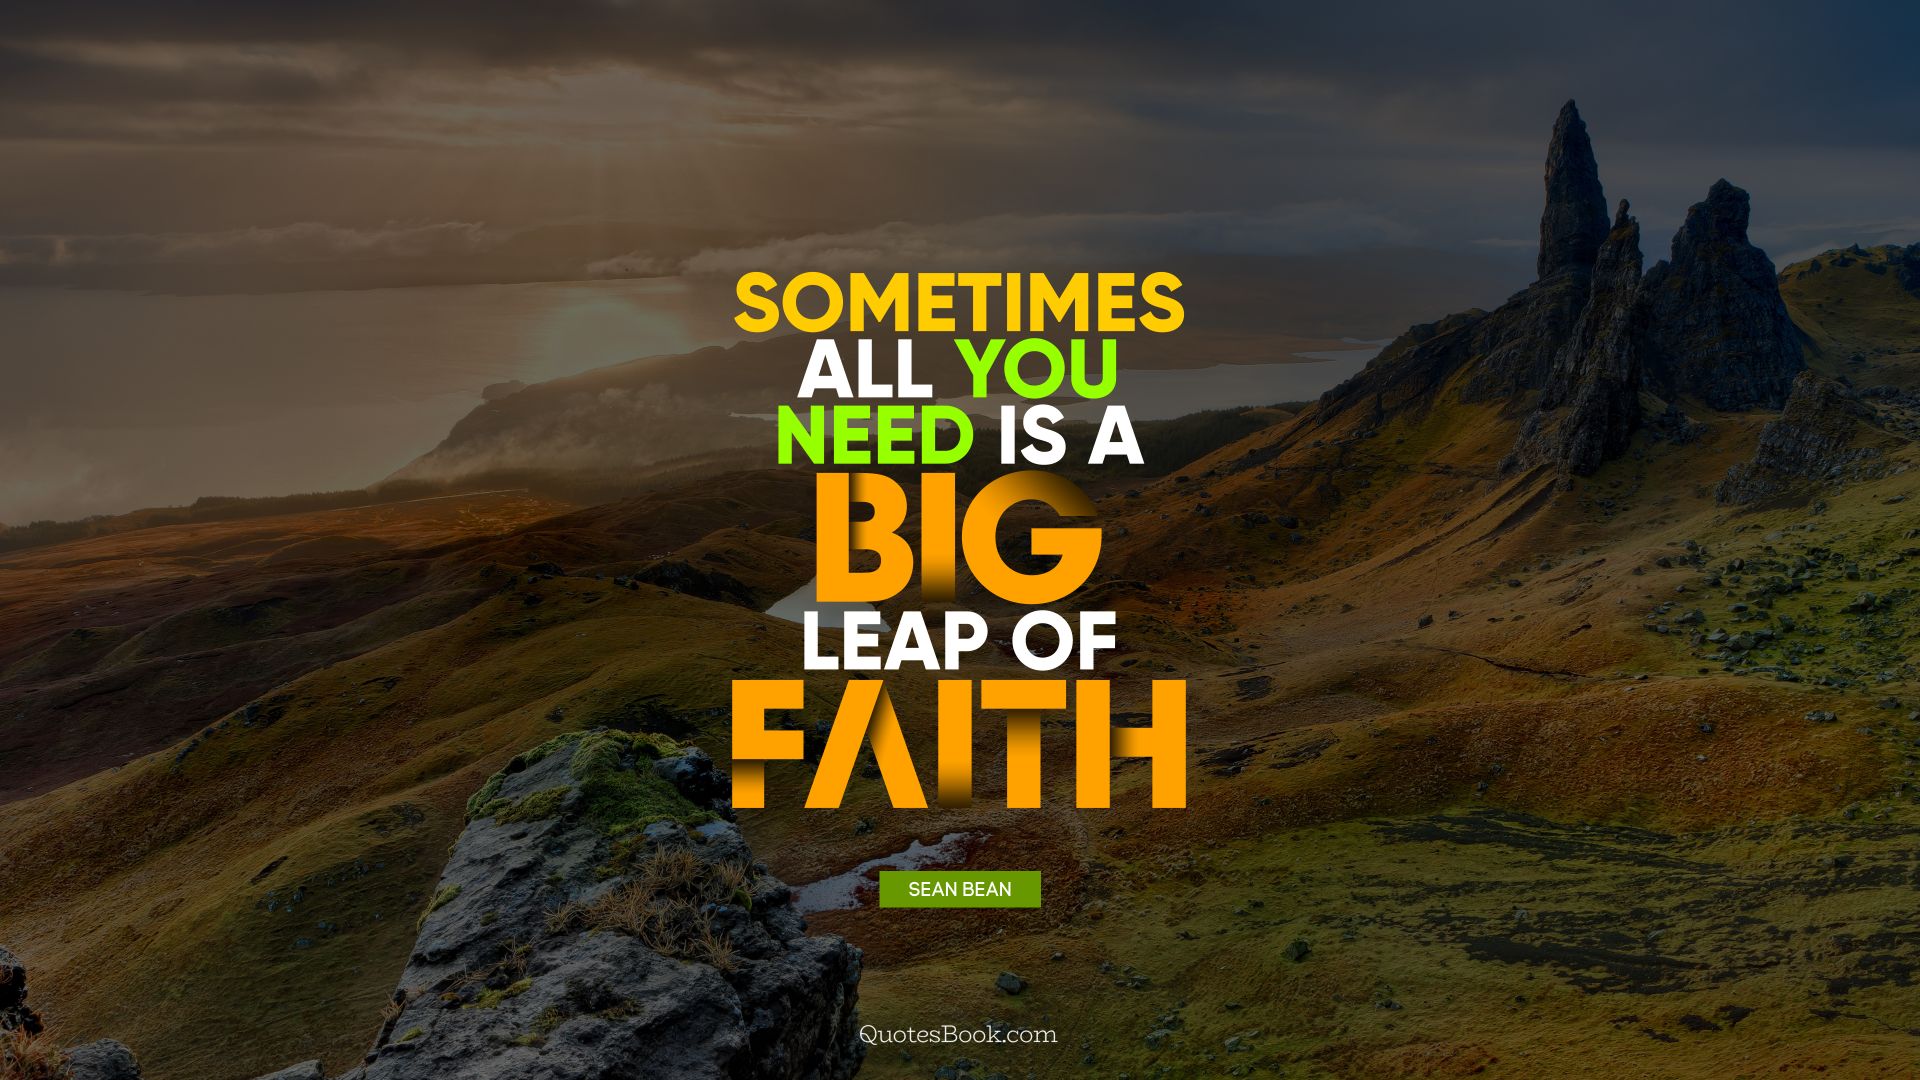 Sometimes all you need is a big leap of faith. - Quote by Sean Bean